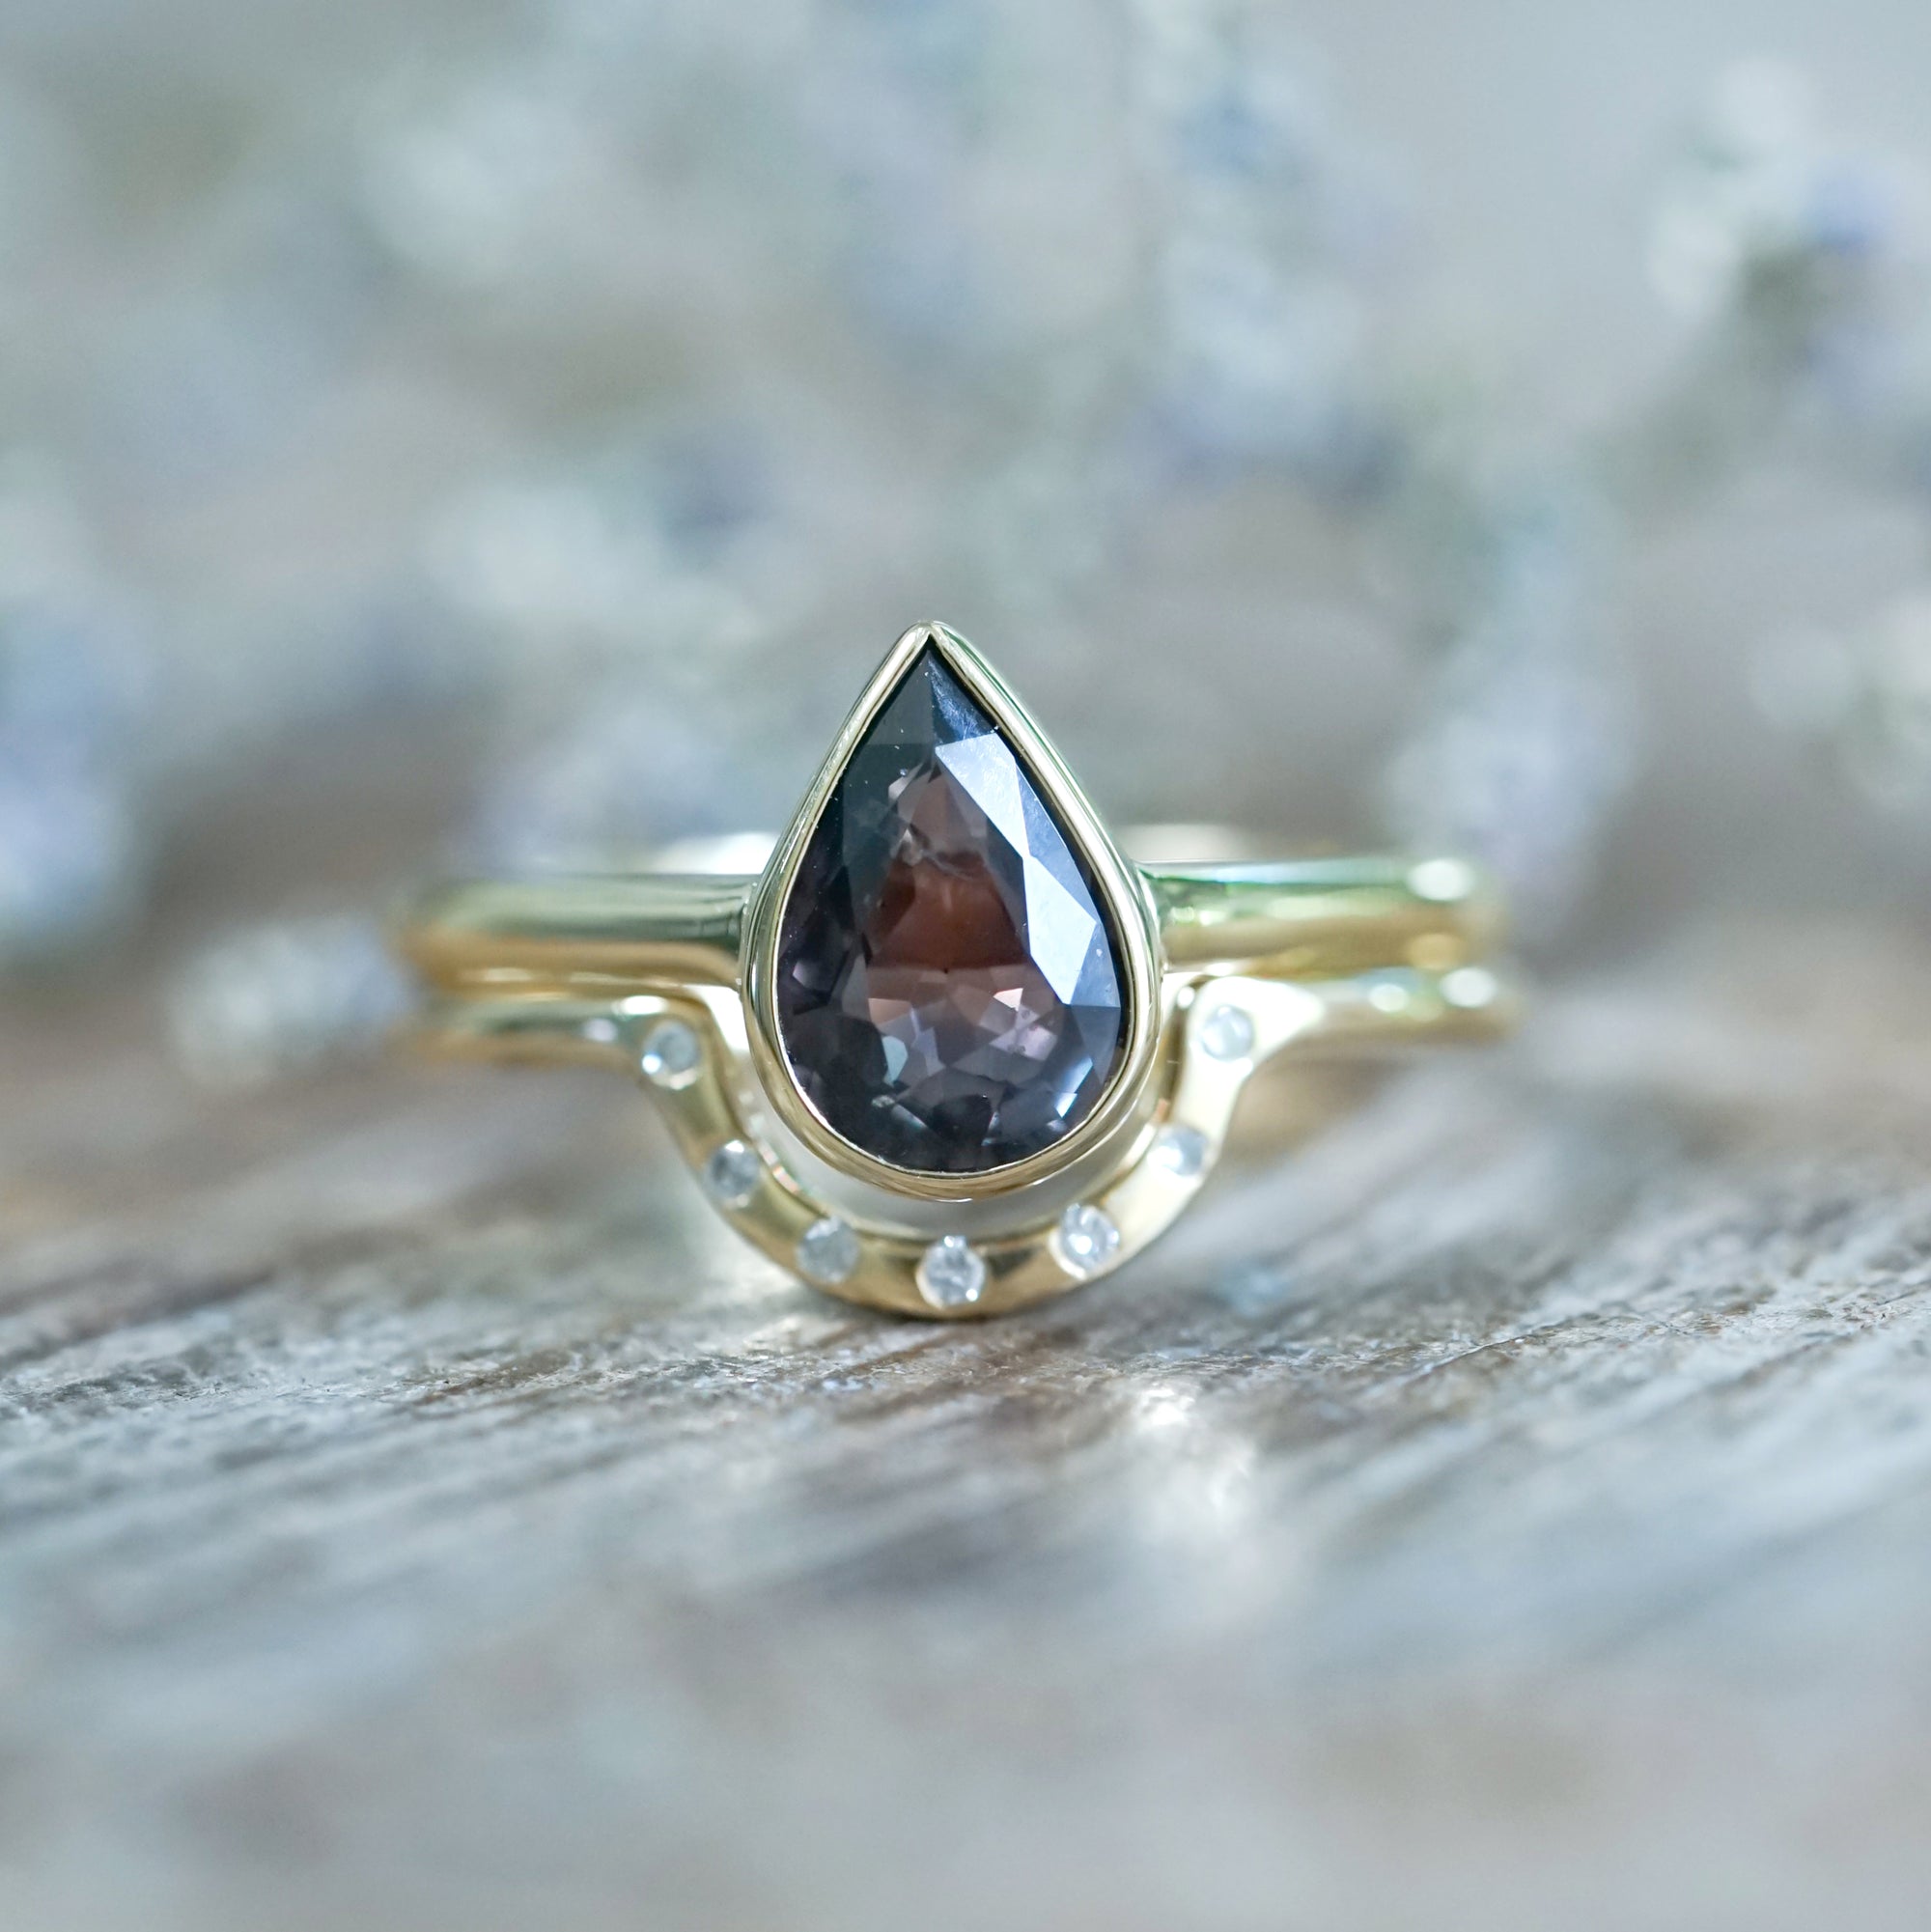 Pear Sapphire Ring Set in Ethical Gold - Gardens of the Sun | Ethical Jewelry